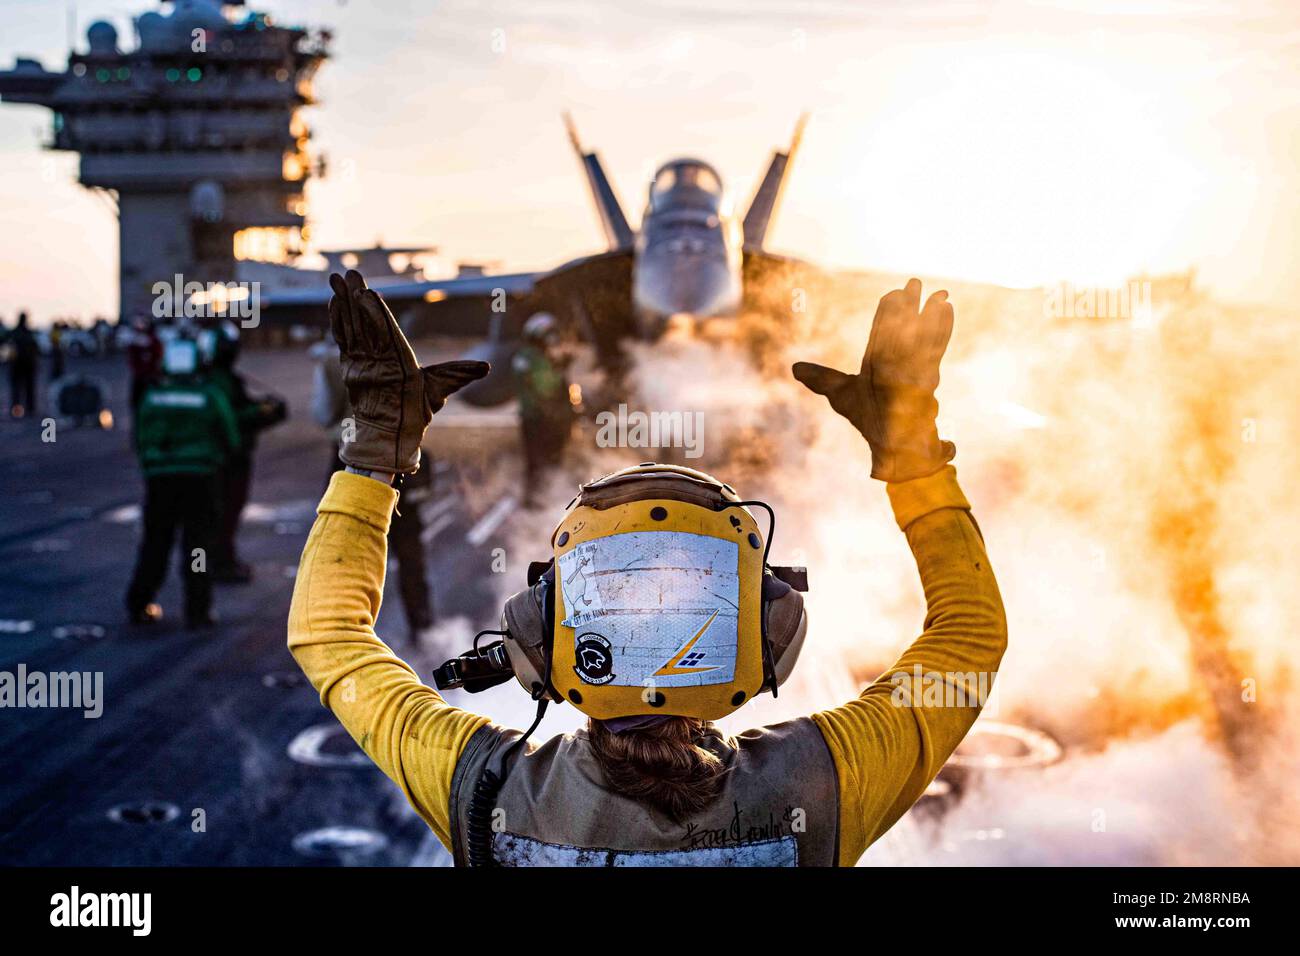 USS Nimitz, United States. 13th Jan, 2023. A U.S. Navy F/A-18E Super Hornet fighter aircraft from the Mighty Shrikes of Strike Fighter Squadron 94, is positioned for launch on the flight deck of the Nimitz-class aircraft carrier USS Nimitz at sunset underway conducting routine operations, January 13, 2023 in the South China Sea. Credit: MC2 David Rowe/U.S Navy Photo/Alamy Live News Stock Photo